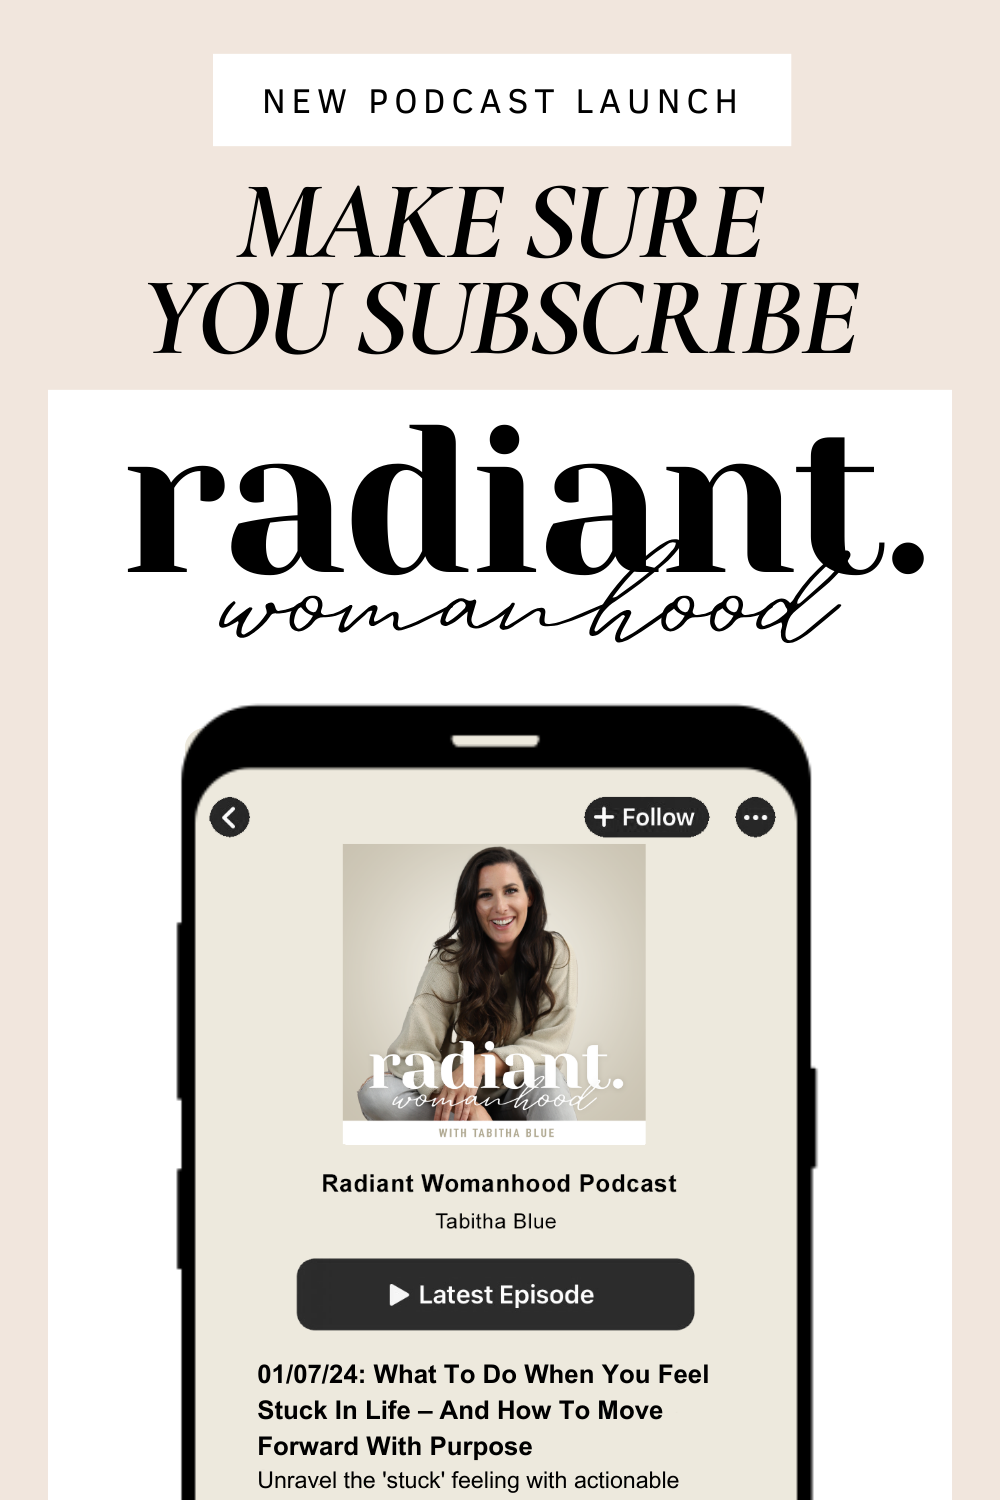 Make sure you subscribe to the Radiant Womanhood Podcast and watch the teaser trailer.